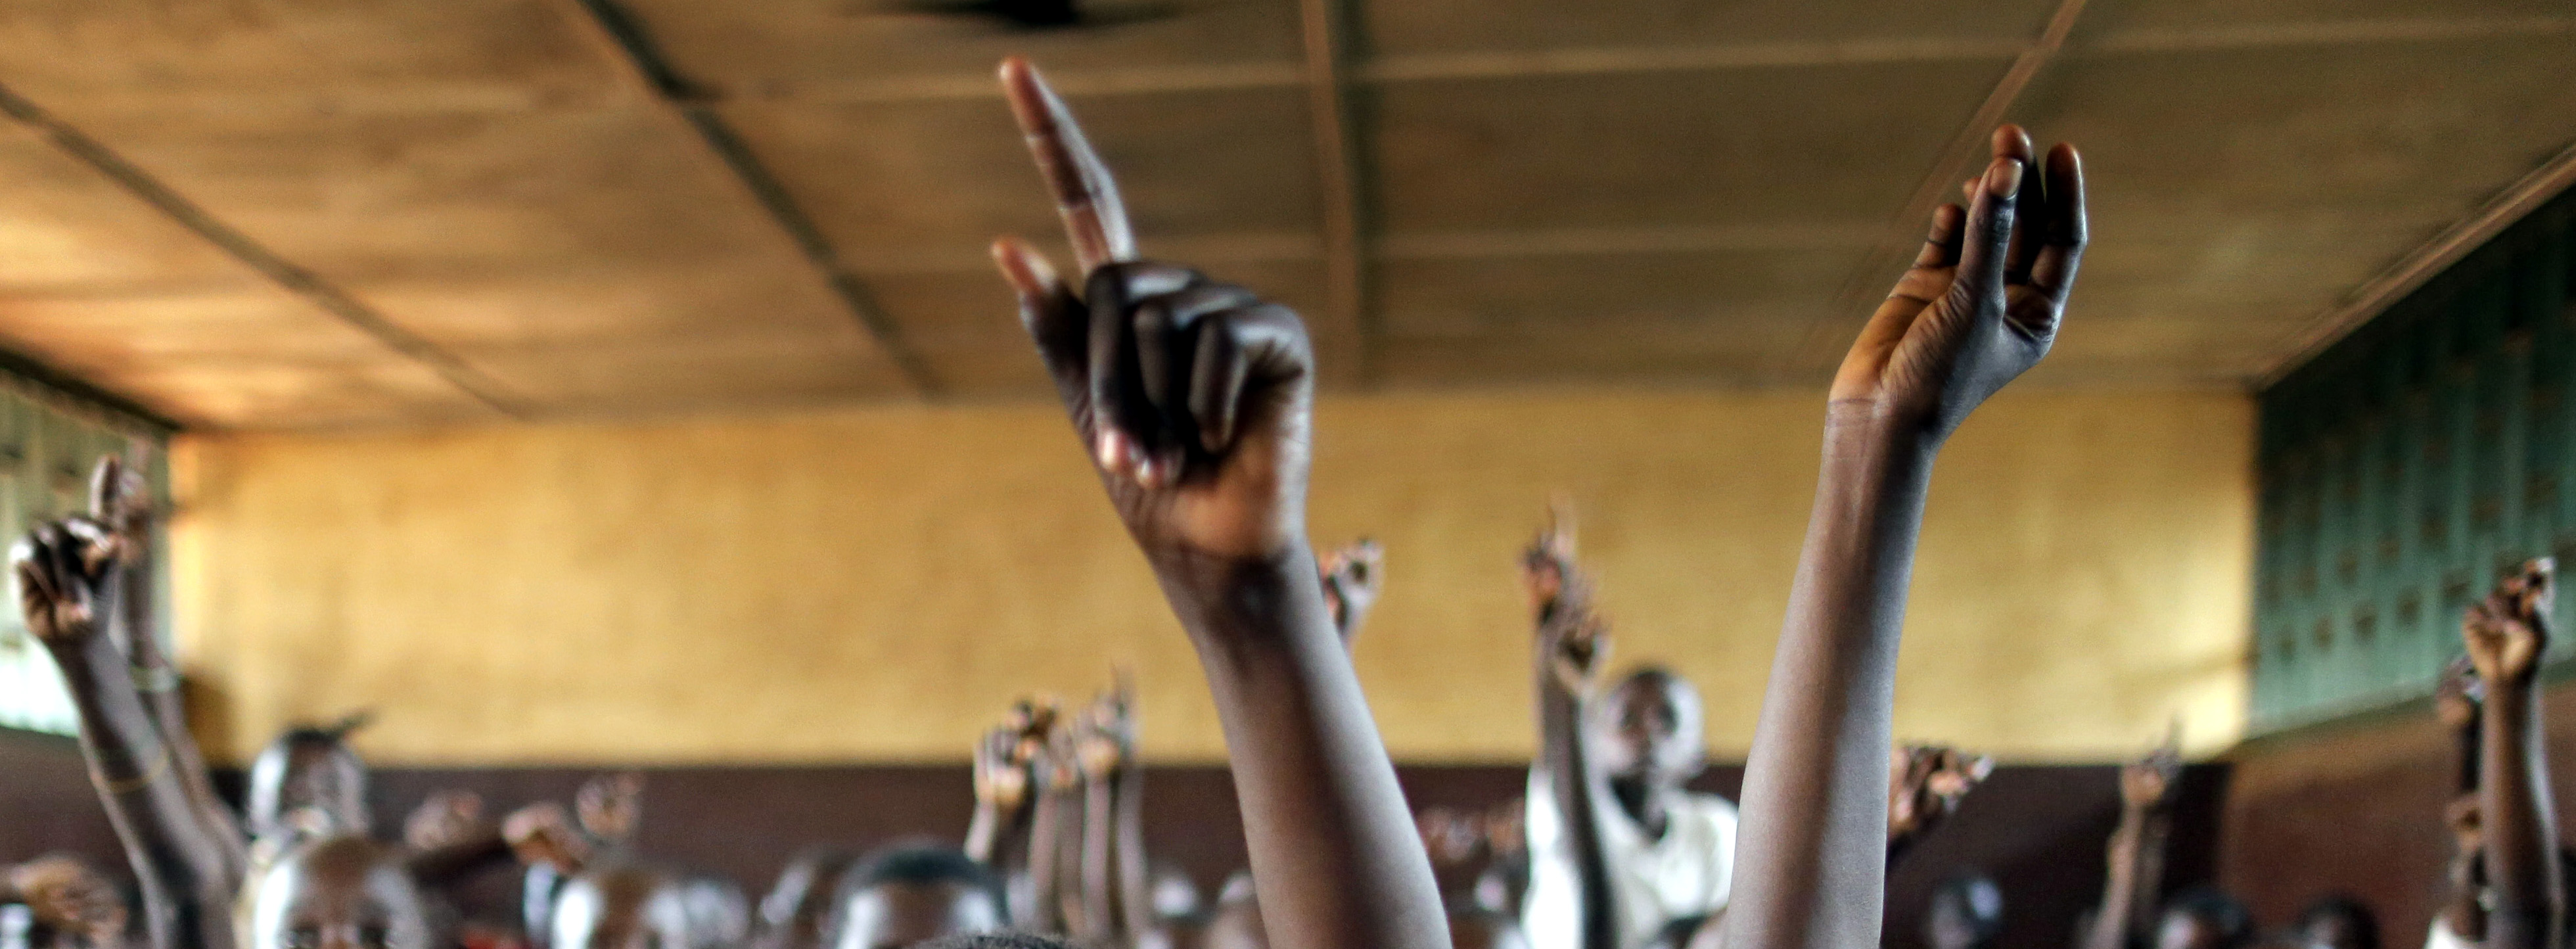 Symbolic image: Pupils raise their hands to report to class